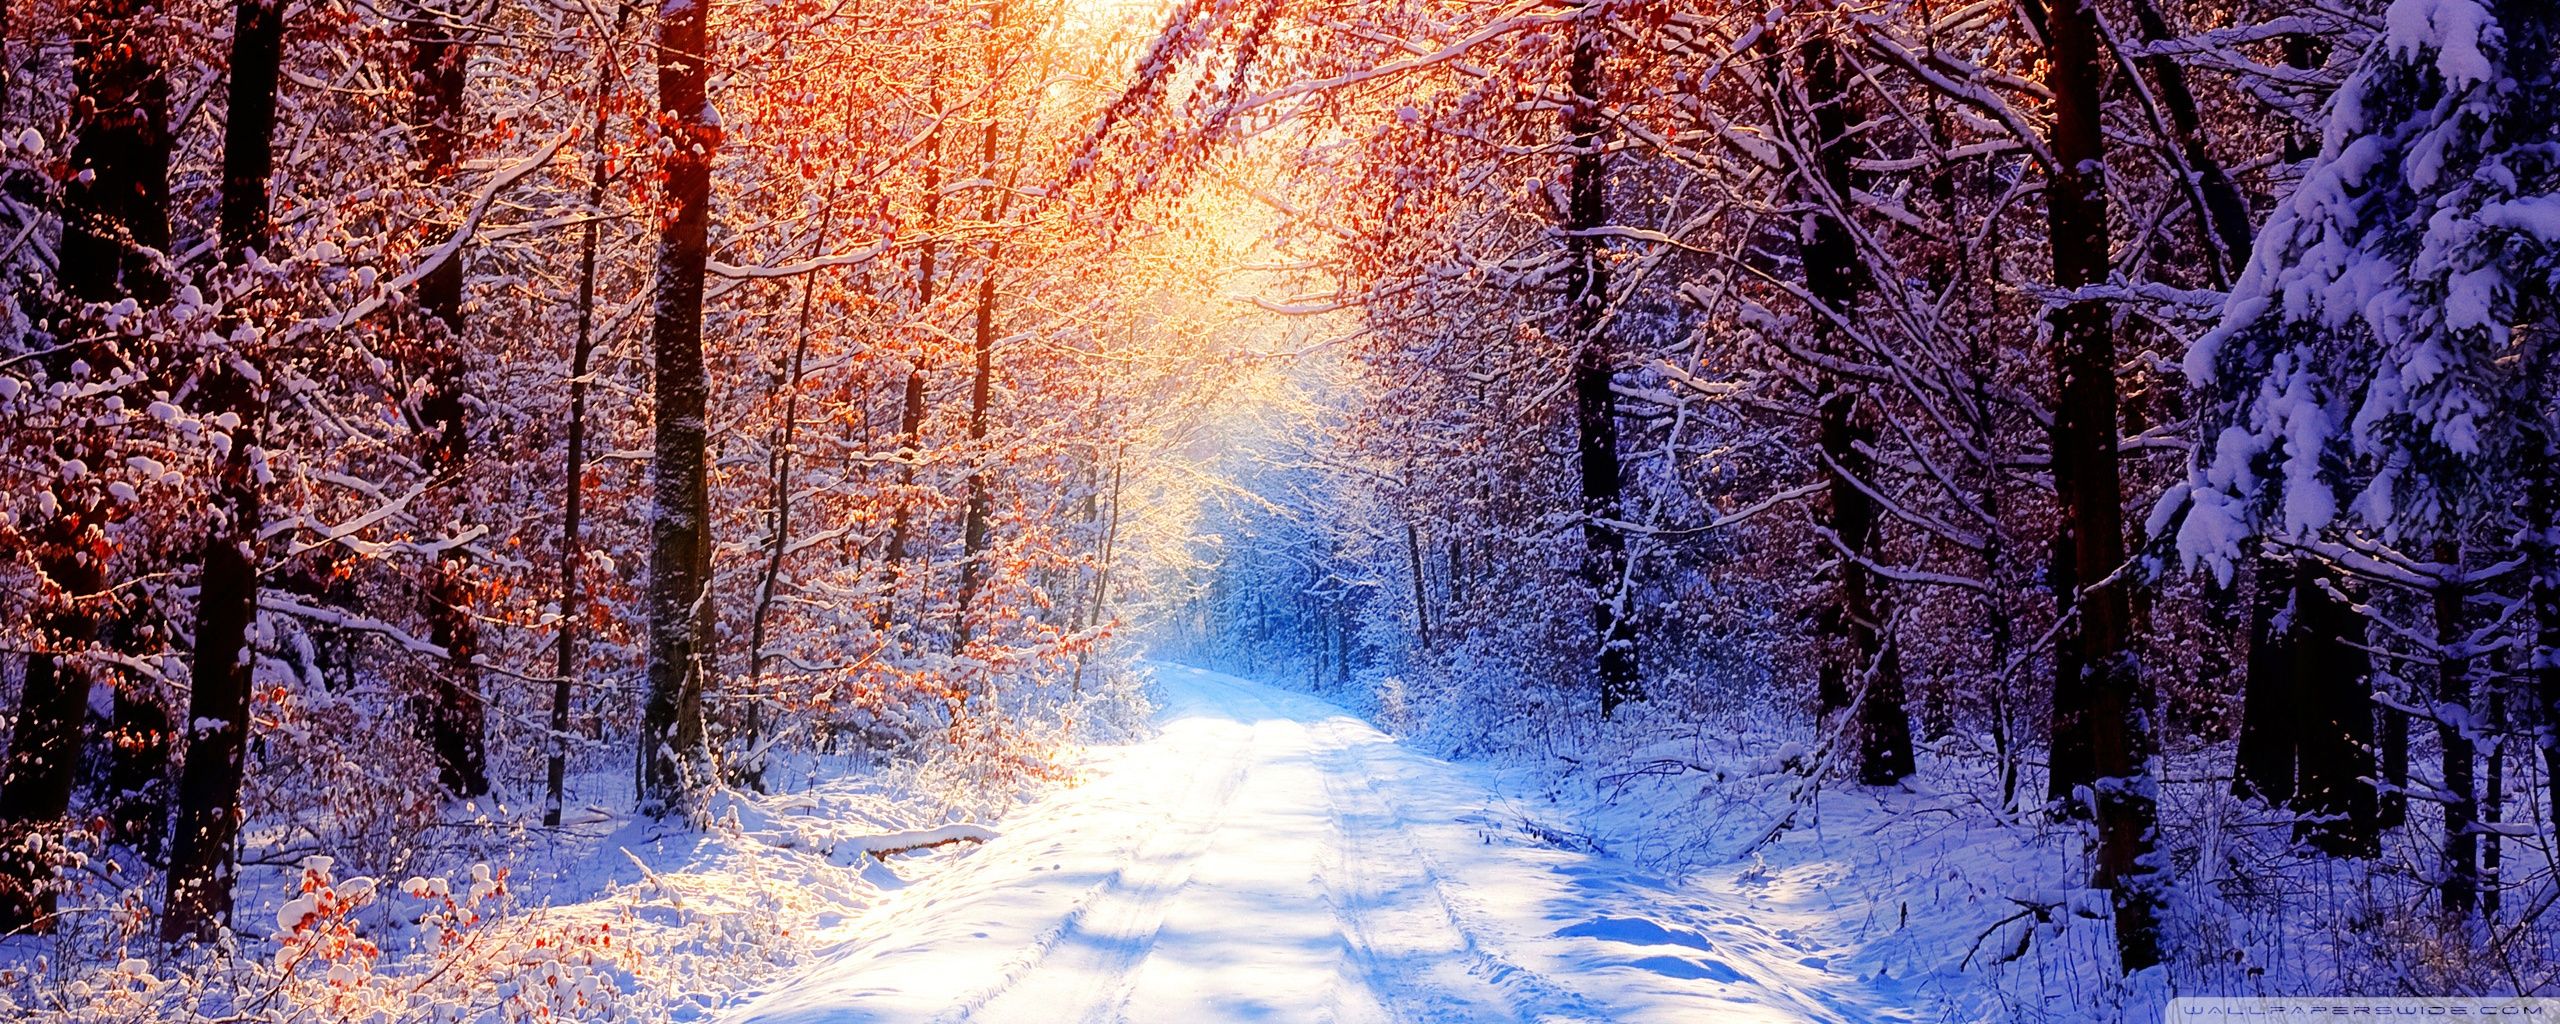 Winter Widescreen Dual Monitor Wallpaper Photo Download JPG, PNG, GIF, RAW, TIFF, PSD, PDF and Watch Online